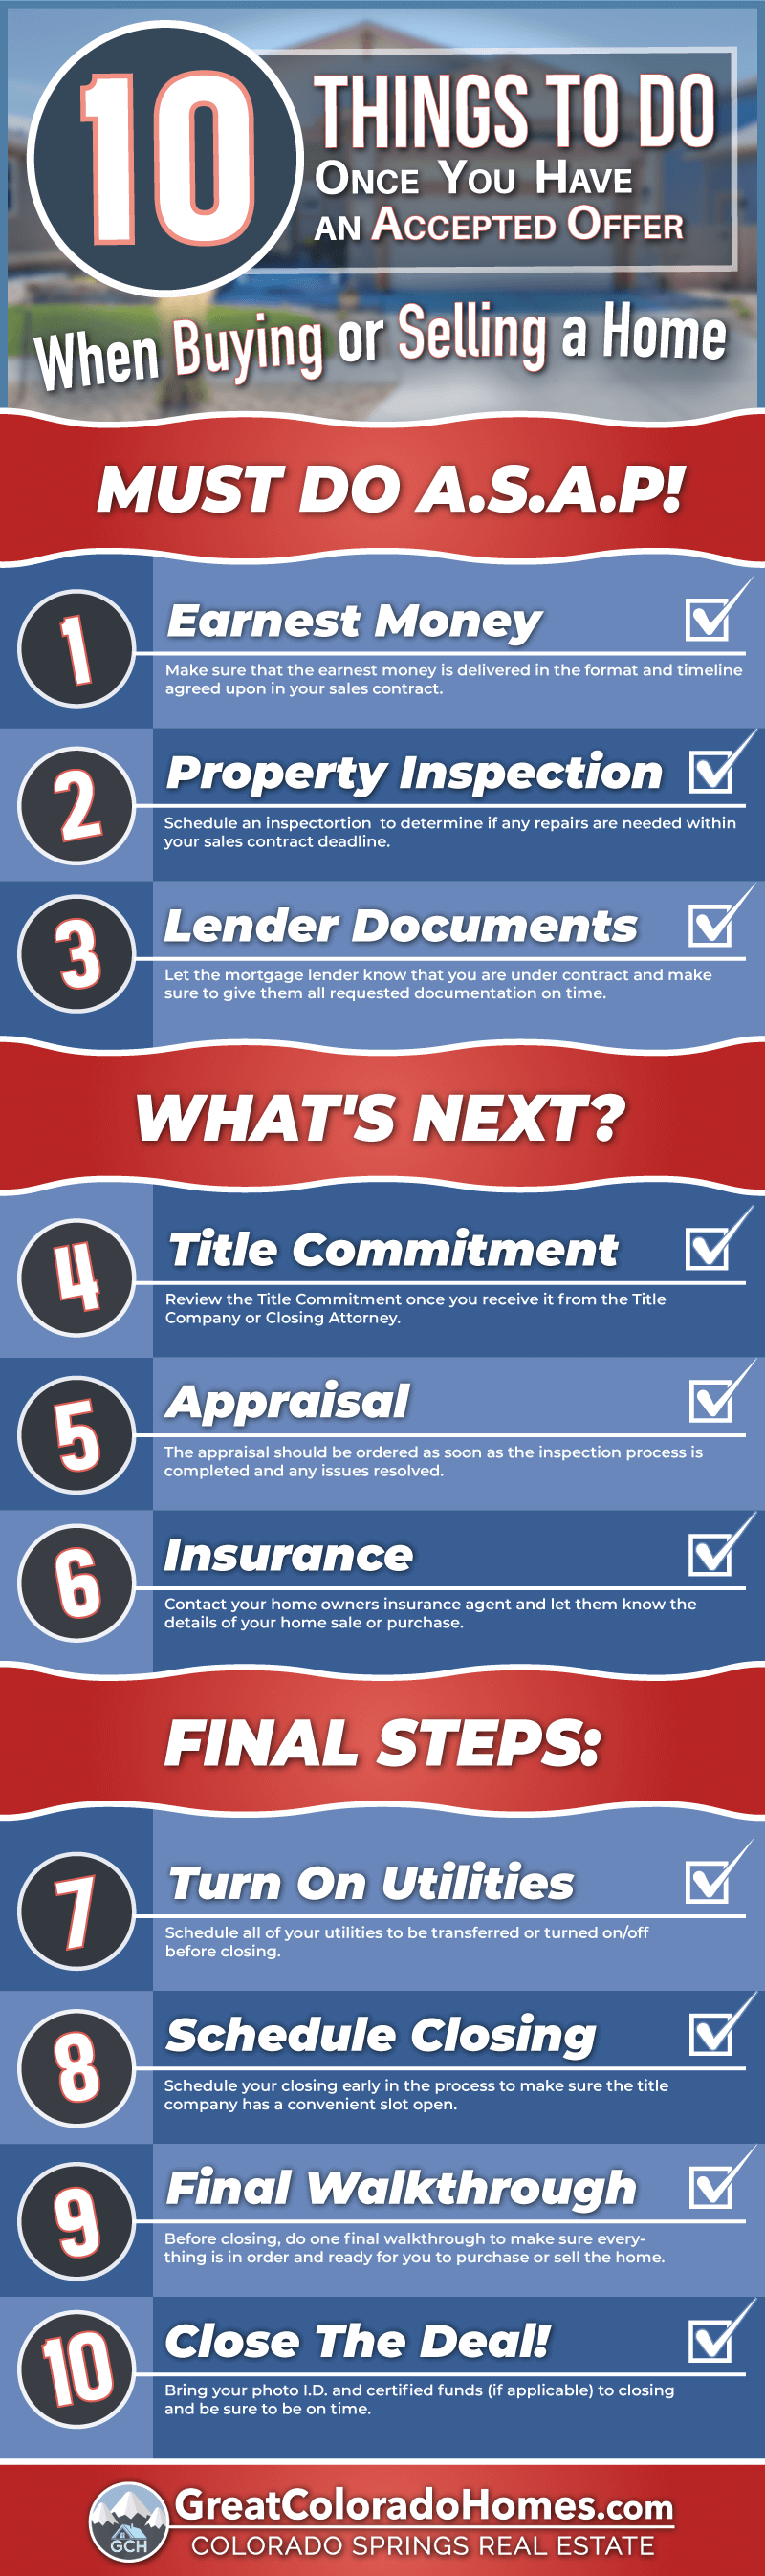 10 Things to Do Once Your Offer is Accepted When Buying or Selling A Home Infographic